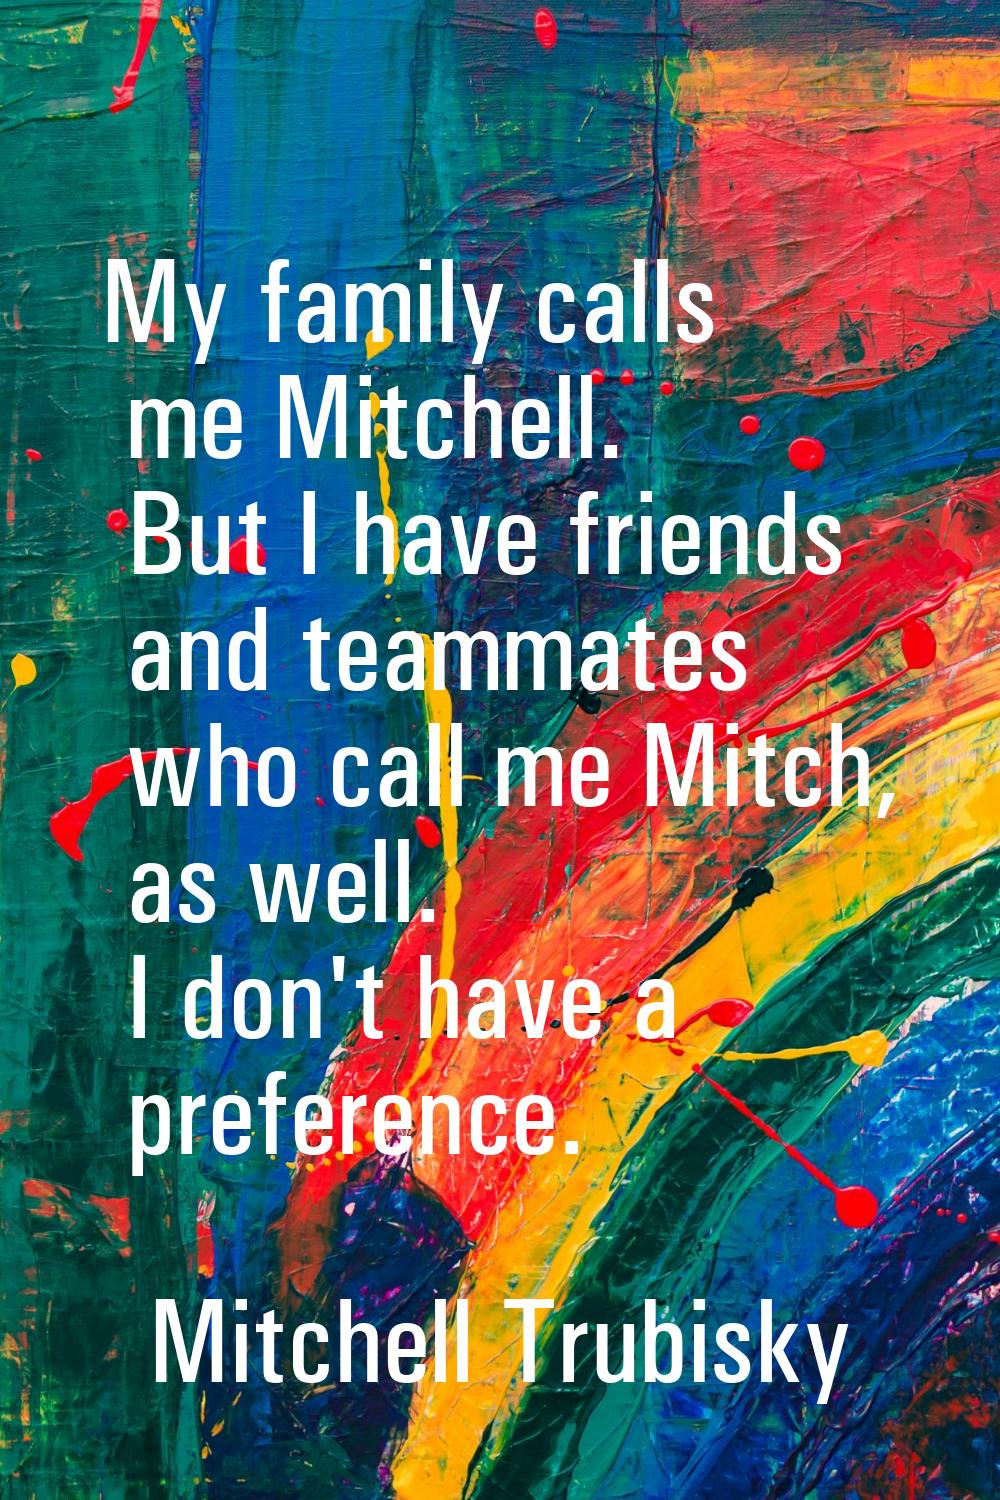 My family calls me Mitchell. But I have friends and teammates who call me Mitch, as well. I don't h